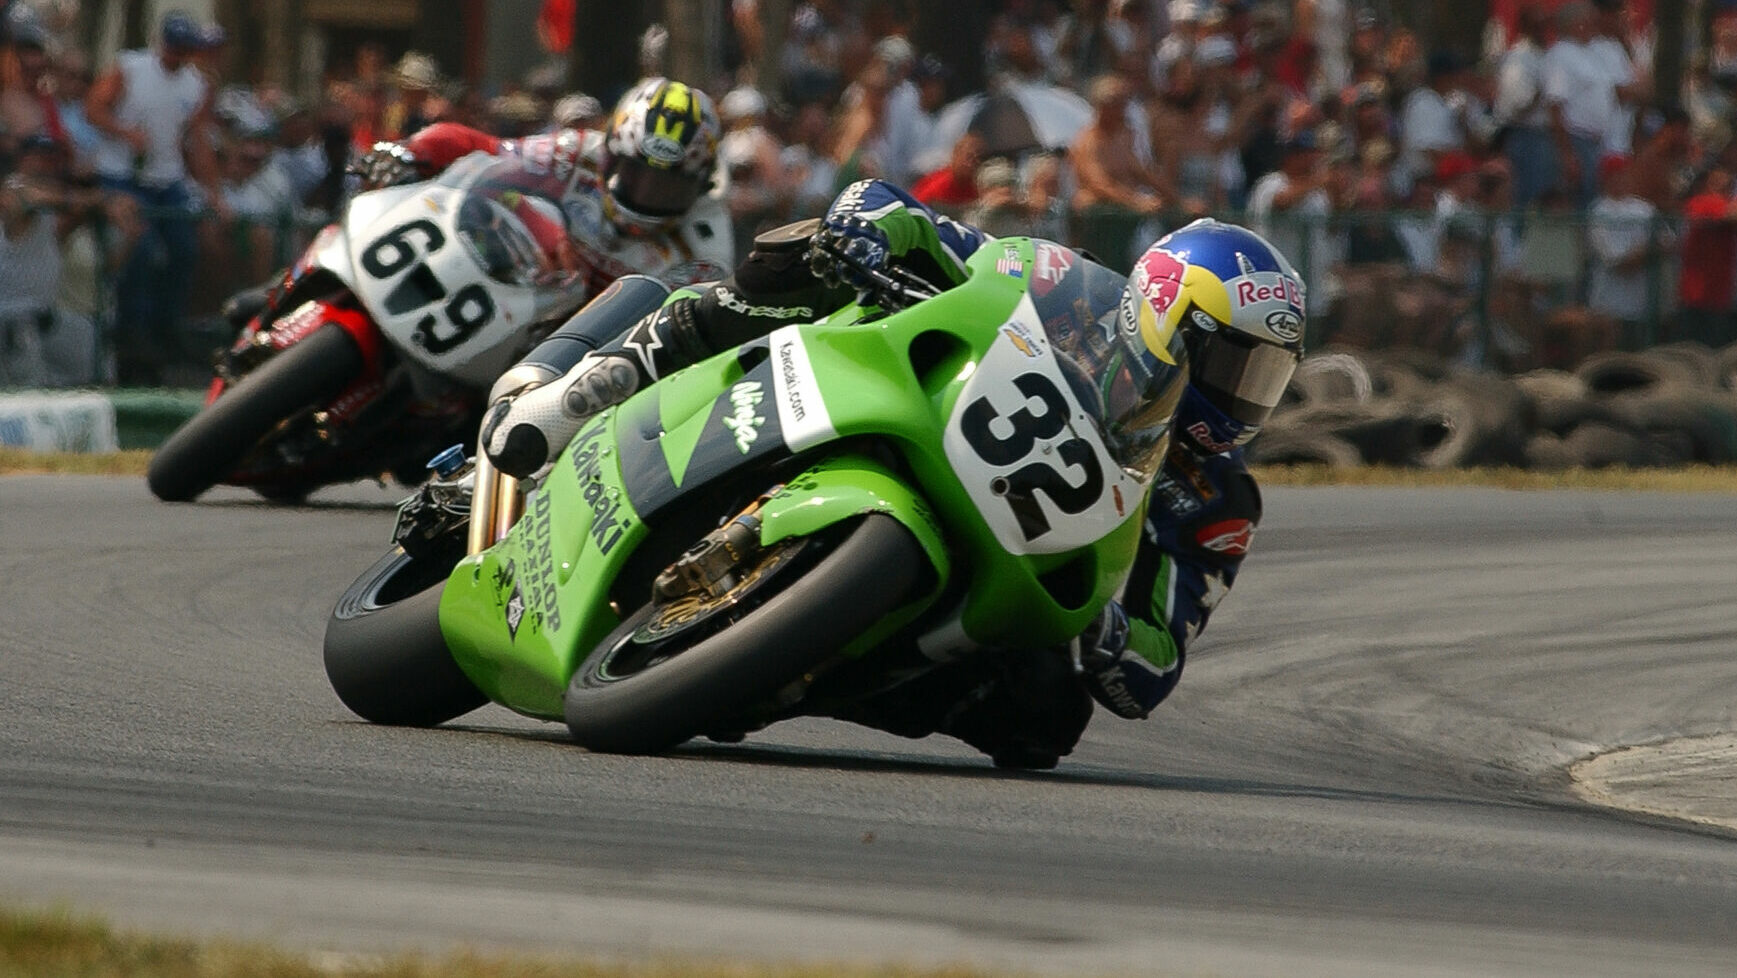 Eric Bostrom (32) leading Nicky Hayden (69) in an AMA Superbike race at VIR circa 2002. Photo by Brian J. Nelson.